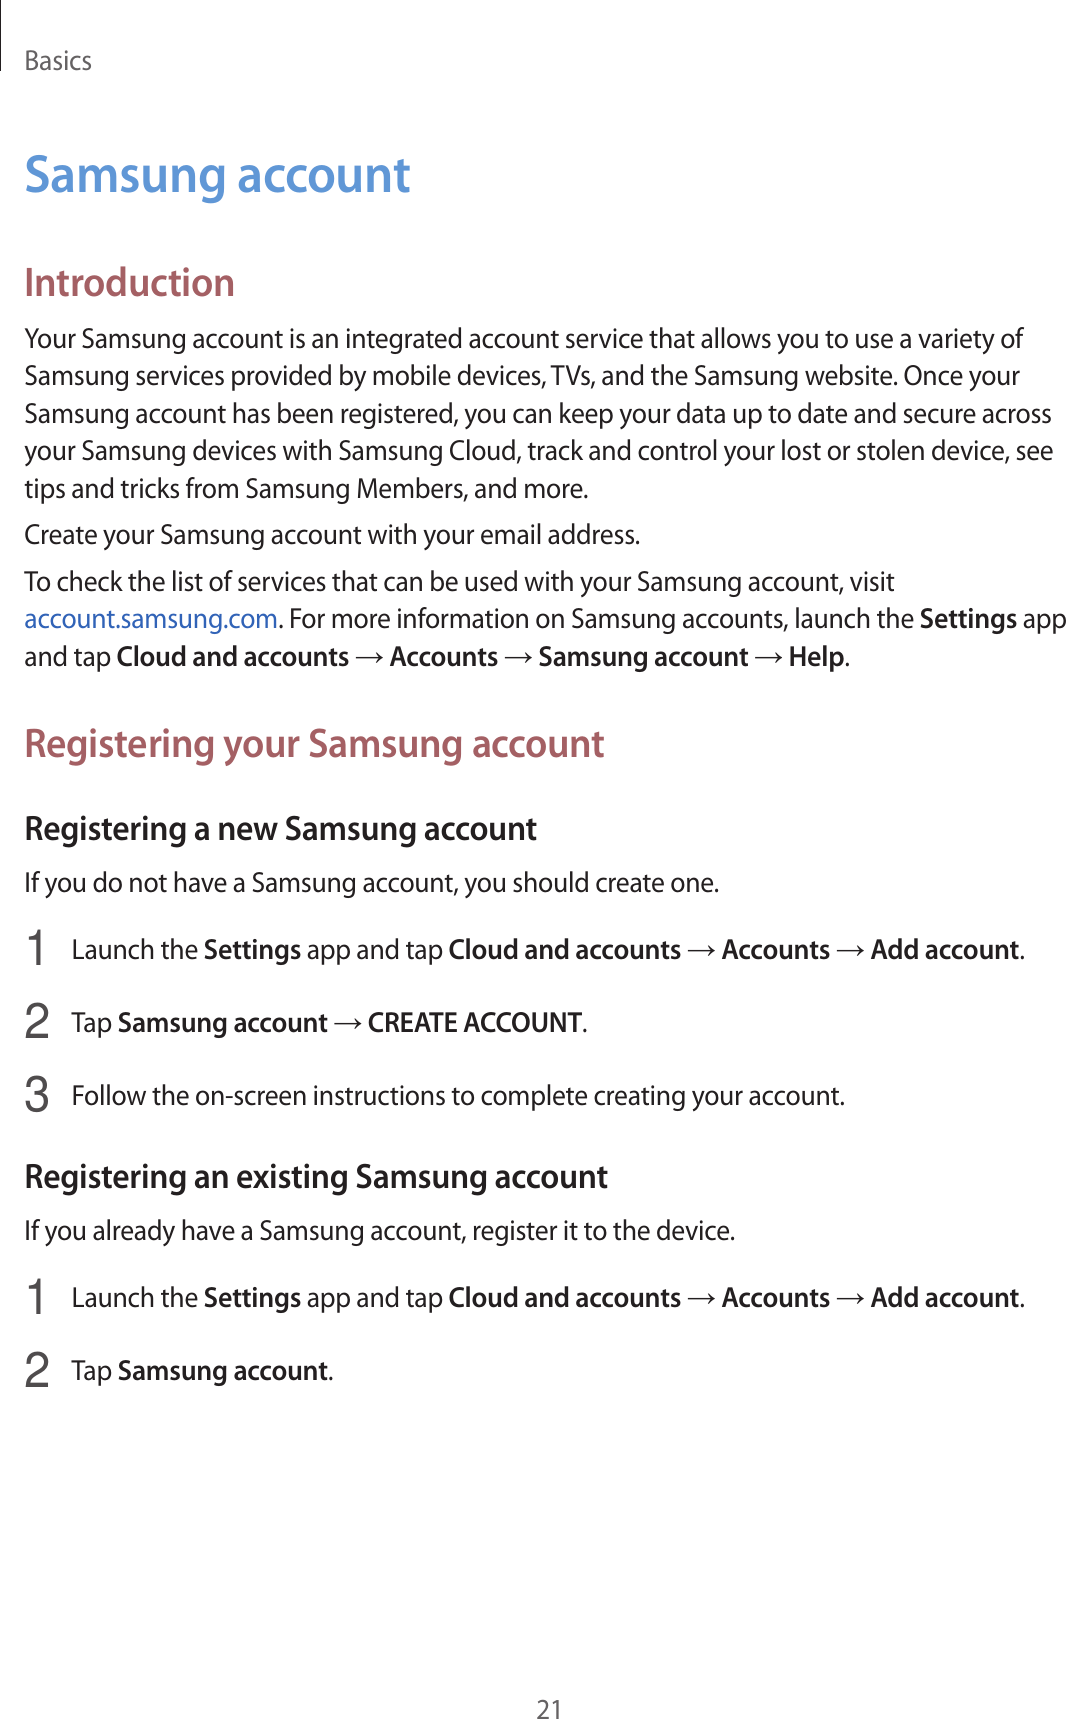 Basics21Samsung accountIntroductionYour Samsung account is an integrated account service that allows you to use a variety of Samsung services provided by mobile devices, TVs, and the Samsung website. Once your Samsung account has been registered, you can keep your data up to date and secure across your Samsung devices with Samsung Cloud, track and control your lost or stolen device, see tips and tricks from Samsung Members, and more.Create your Samsung account with your email address.To check the list of services that can be used with your Samsung account, visit account.samsung.com. For more information on Samsung accounts, launch the Settings app and tap Cloud and accounts → Accounts → Samsung account → Help.Registering your Samsung accountRegistering a new Samsung accountIf you do not have a Samsung account, you should create one.1  Launch the Settings app and tap Cloud and accounts → Accounts → Add account.2  Tap Samsung account → CREATE ACCOUNT.3  Follow the on-screen instructions to complete creating your account.Registering an existing Samsung accountIf you already have a Samsung account, register it to the device.1  Launch the Settings app and tap Cloud and accounts → Accounts → Add account.2  Tap Samsung account.